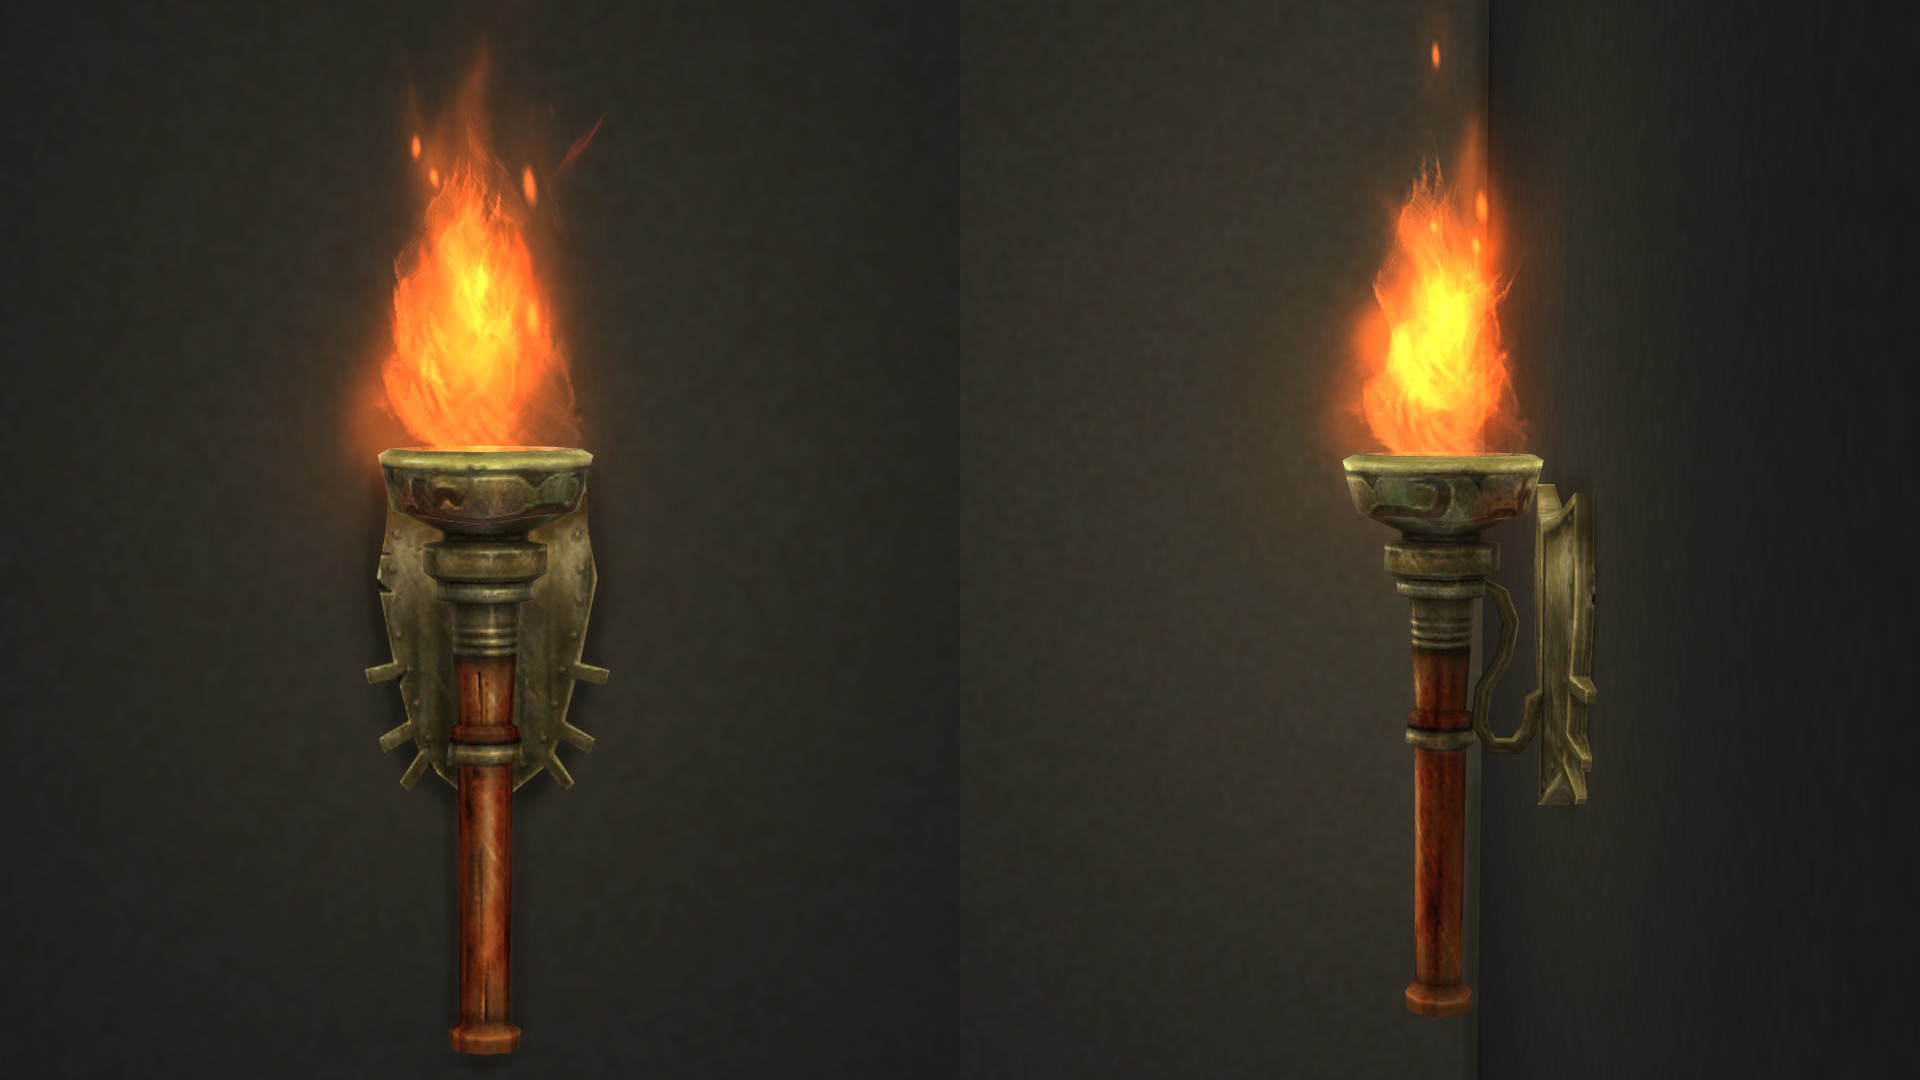 Detail Images Of Torches Nomer 31